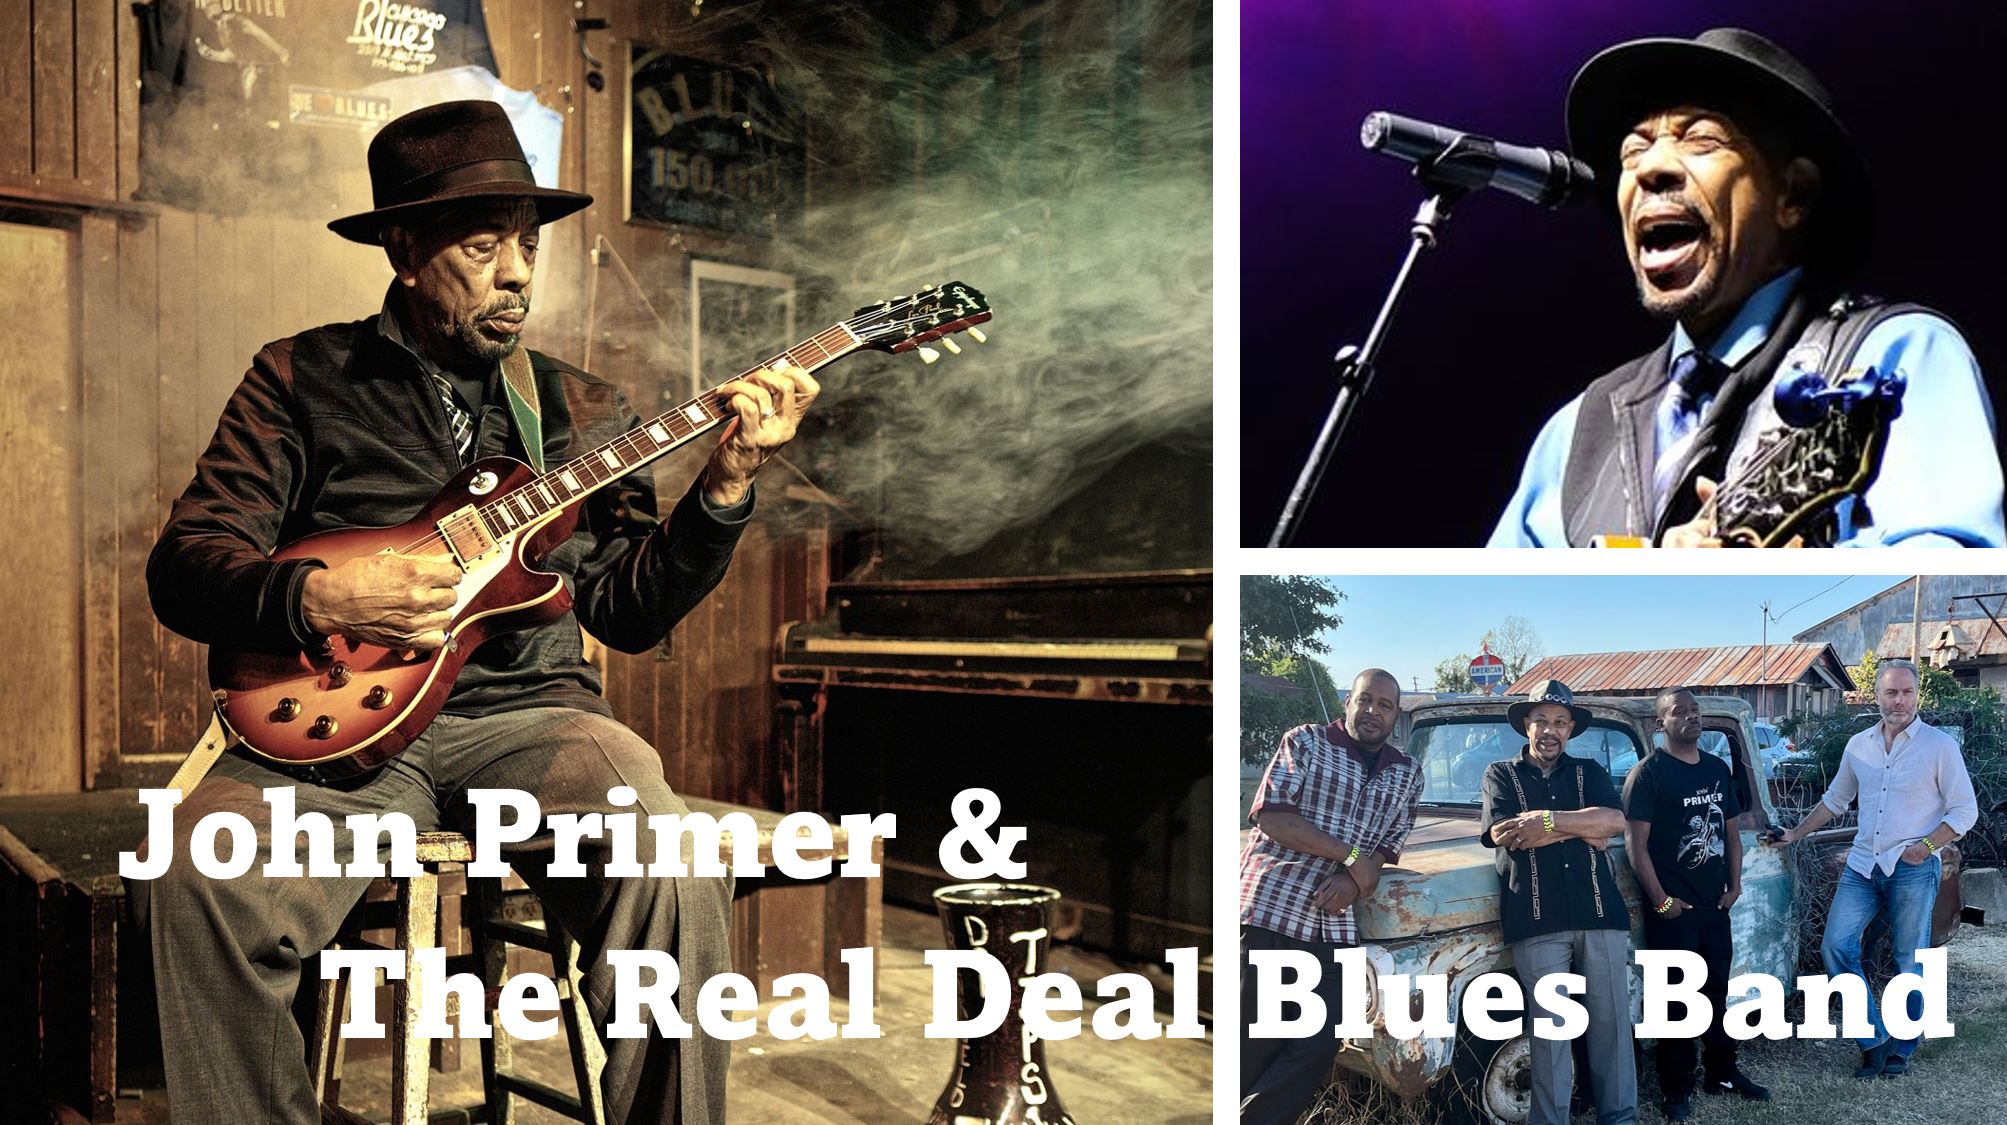 JOHN PRIMER & THE REAL DEAL BLUES BAND (USA, Chicago)